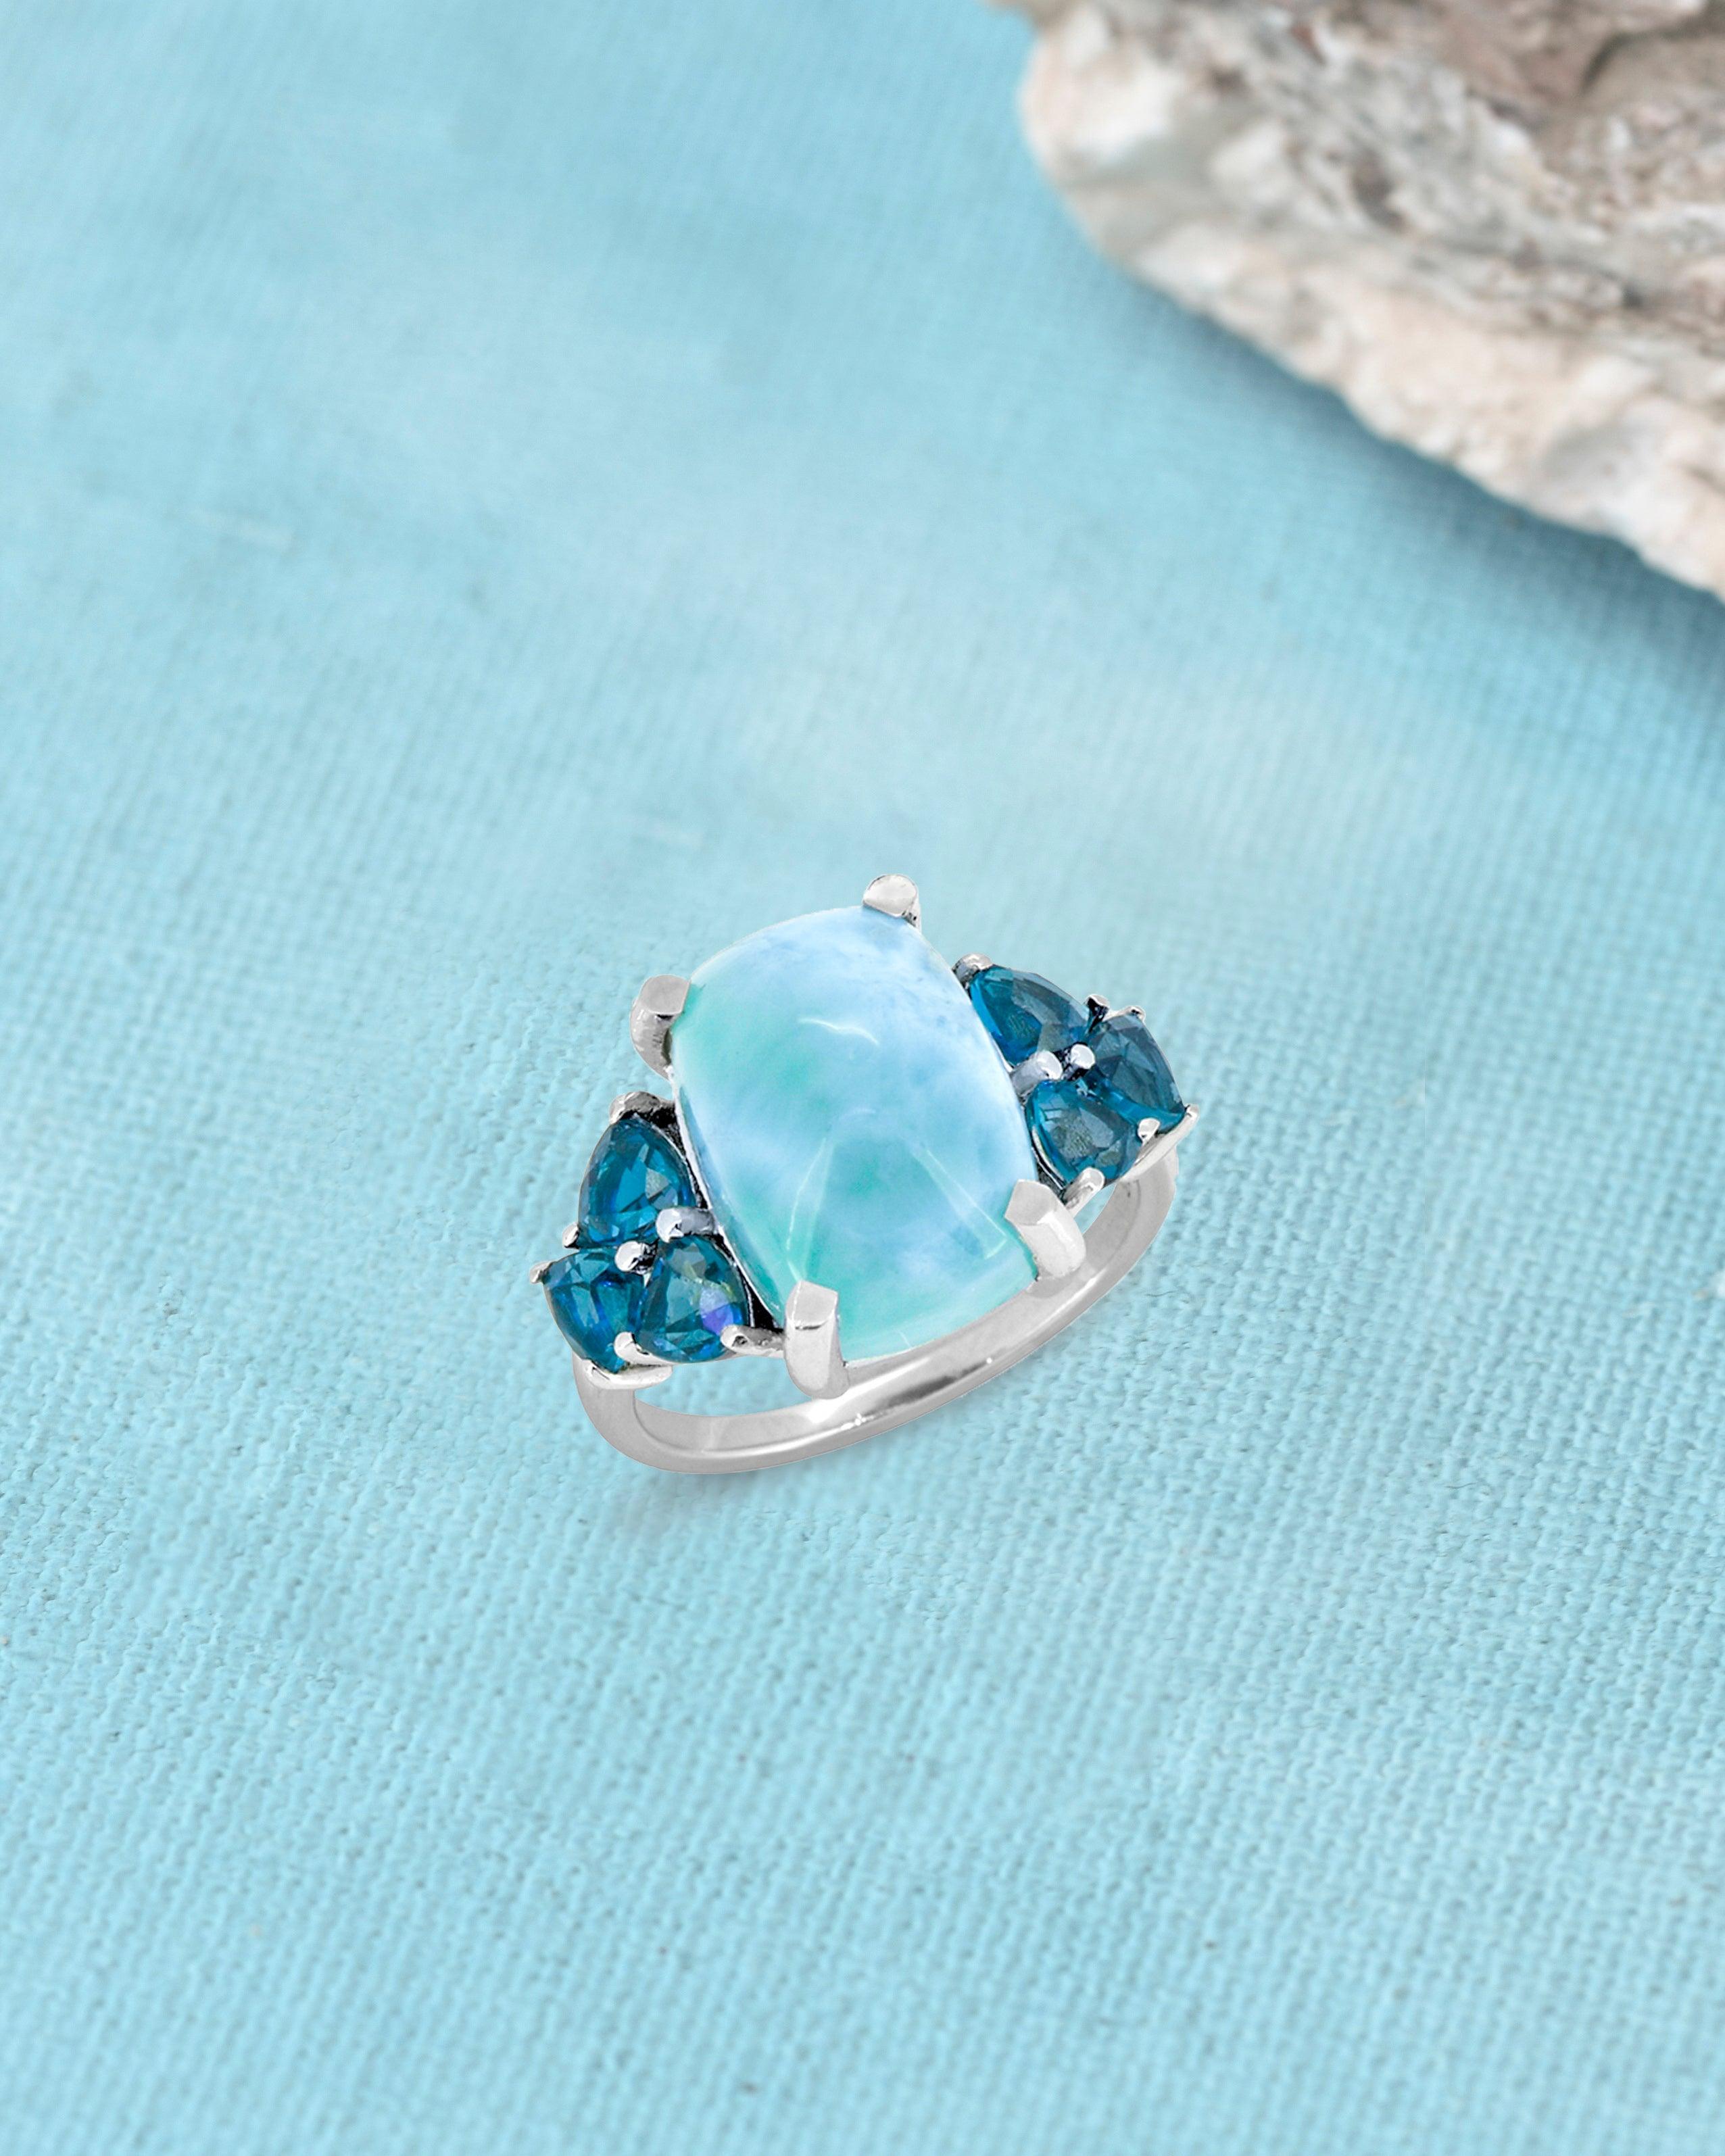 7.30 Ct. Natural Larimar London Blue Topaz Solid 925 Sterling Silver Ring Jewelry - YoTreasure